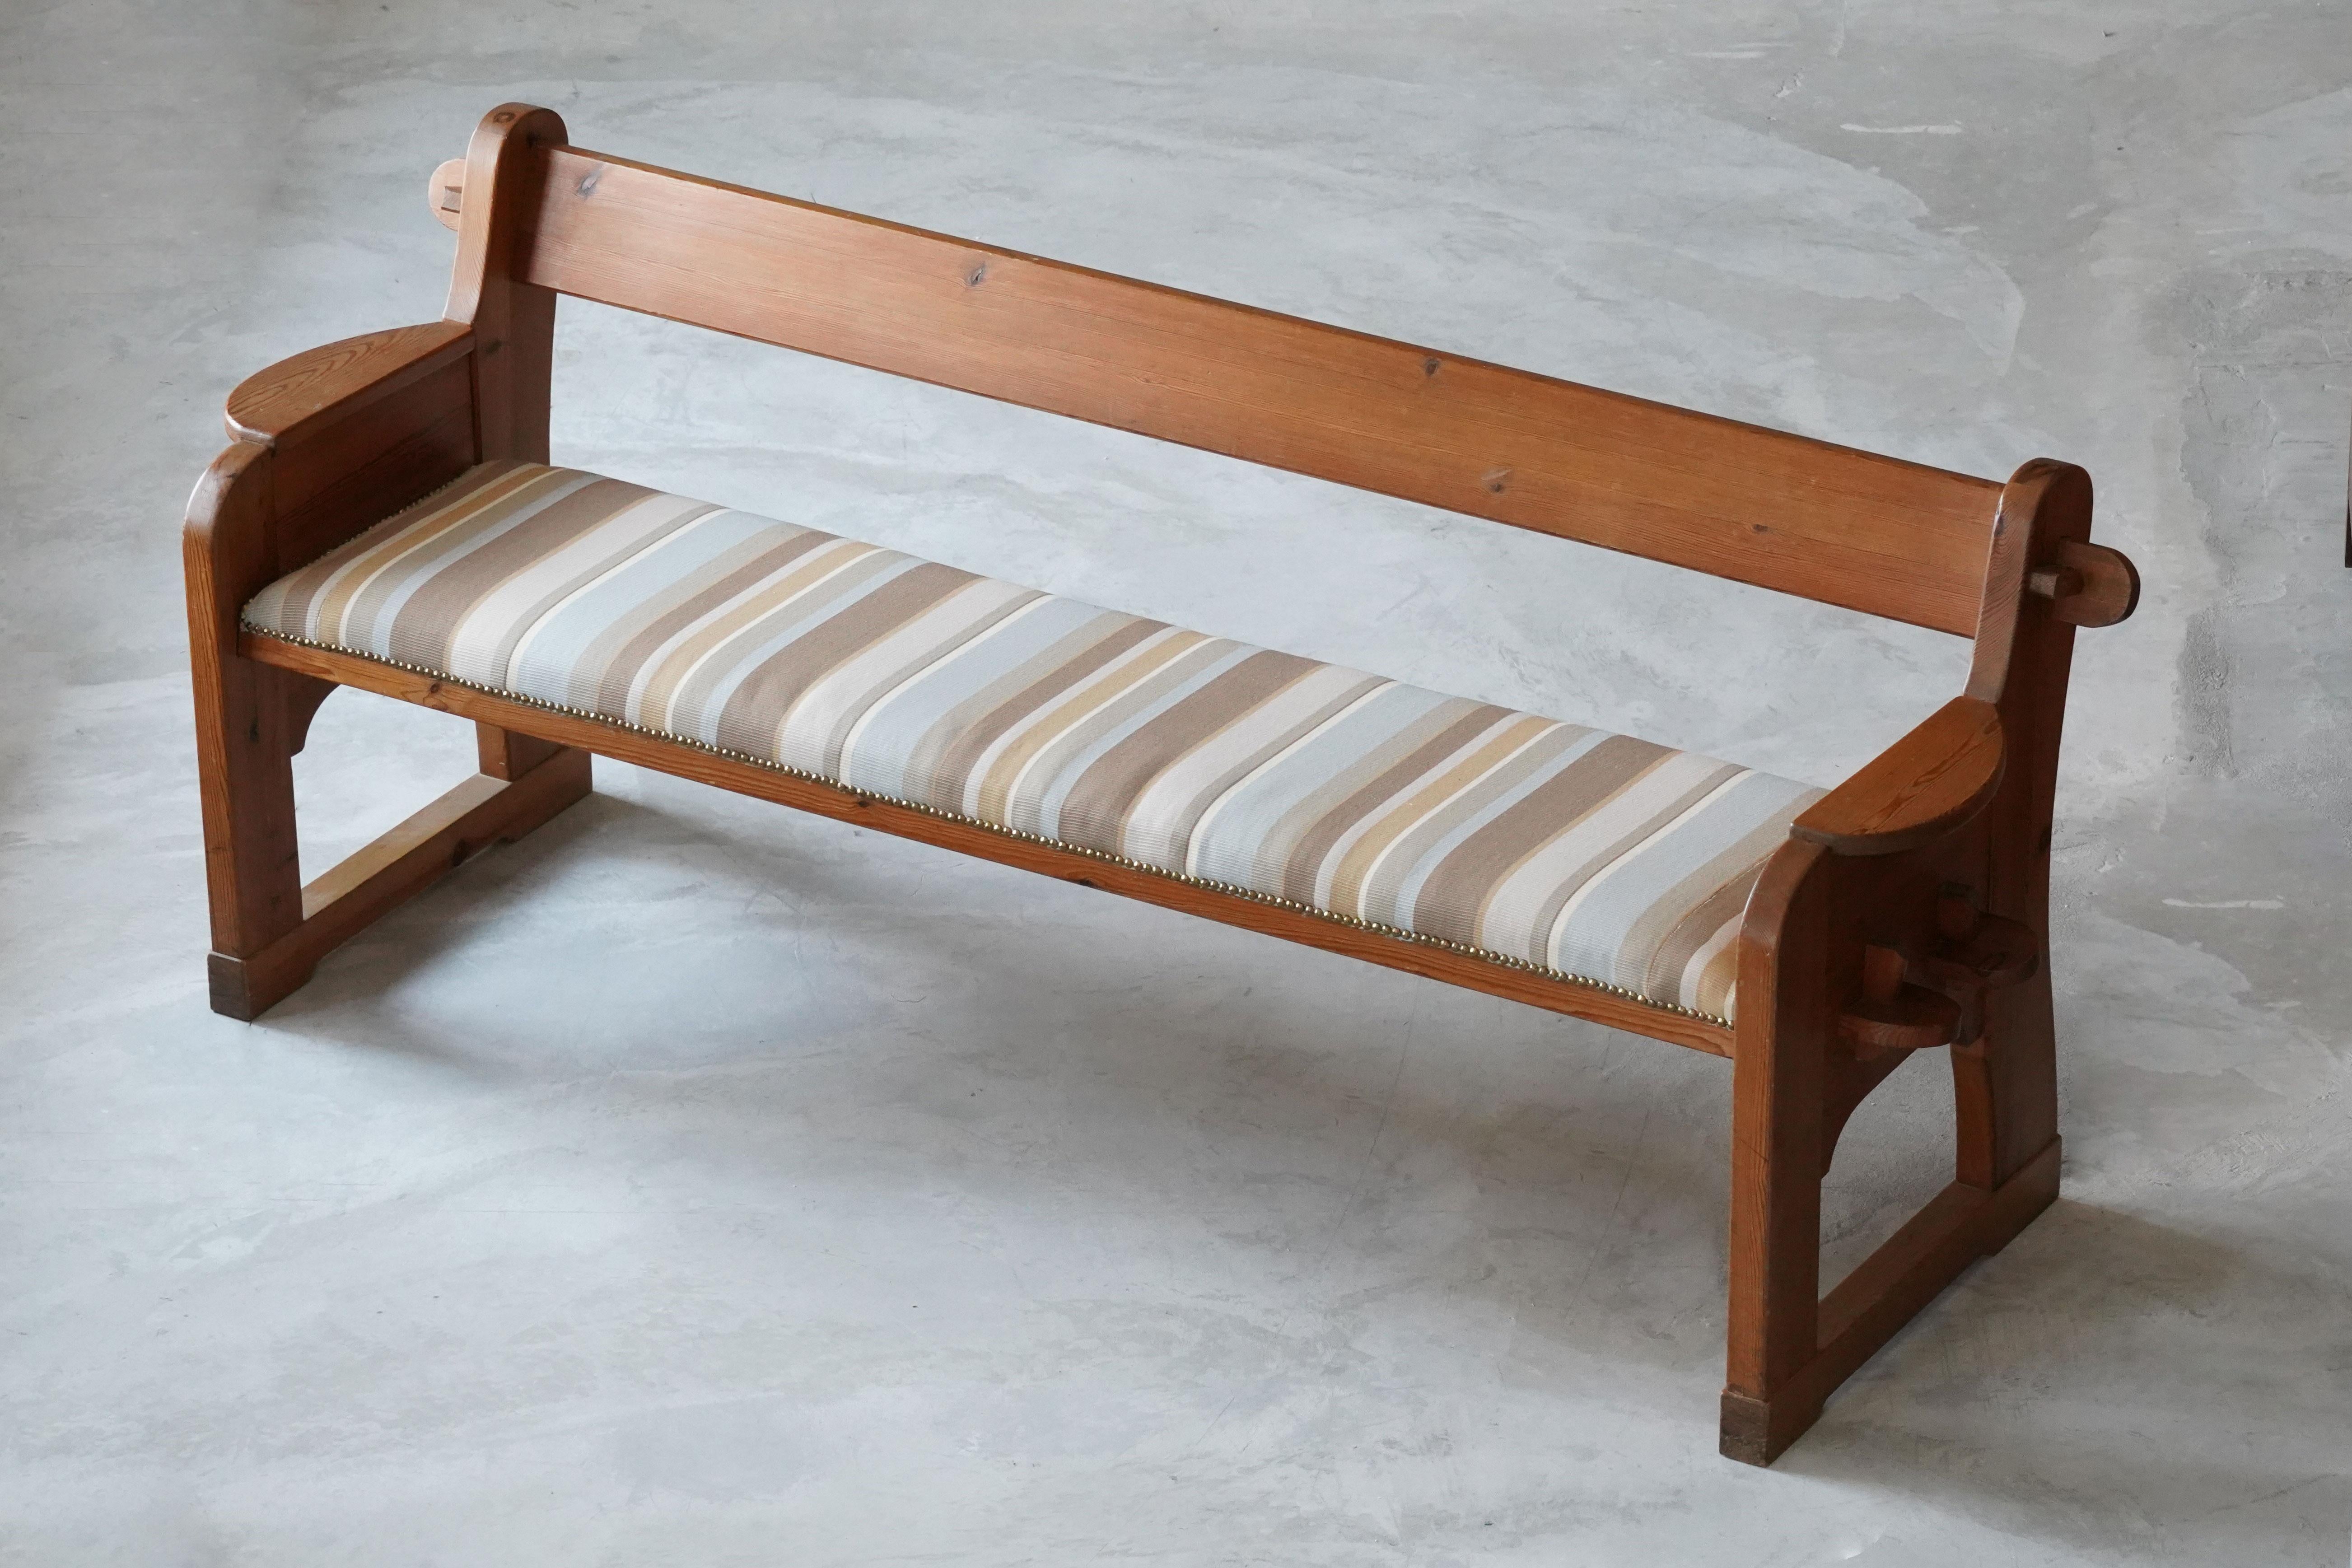 A rare demountable bench designed by David Rosén. Produced and retailed by Nordiska Kompaniet, Sweden, circa 1940s. In pine and fabric. 

David Rosén served as the head designer at Nordiska Kompaniet, preceeded by Axel Einar Hjorth.

Other